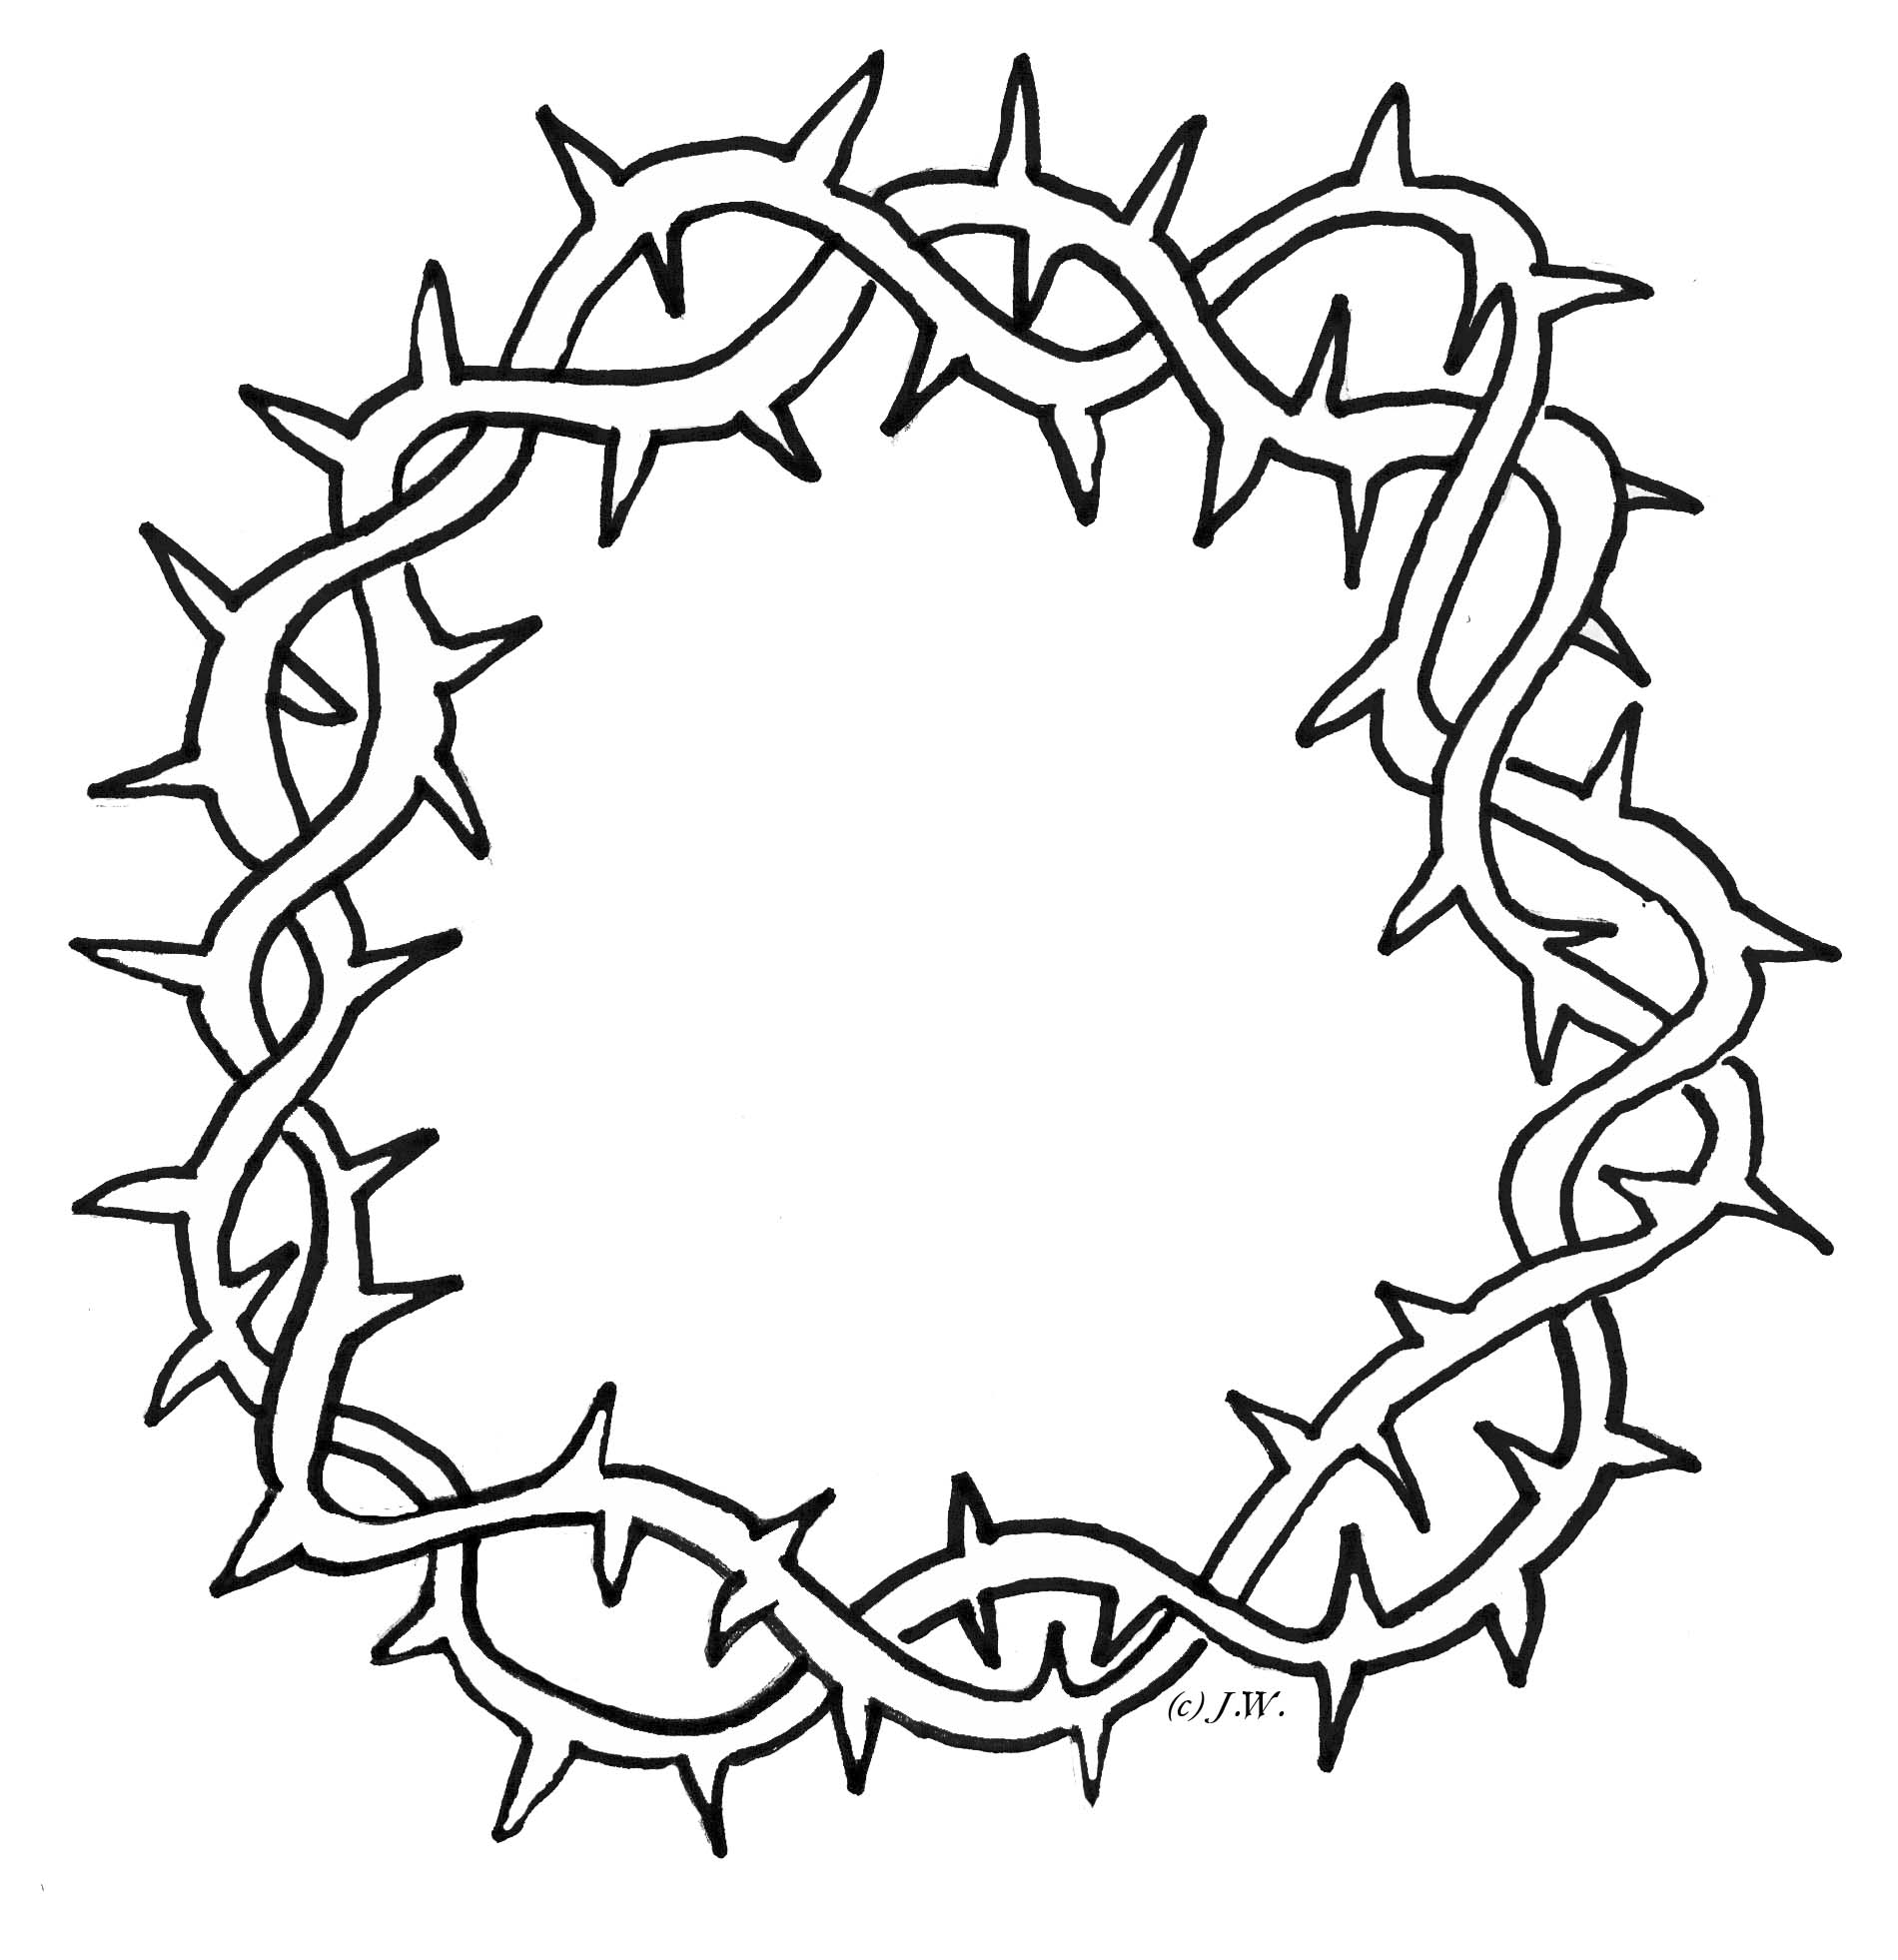 crown of thorns clipart - photo #15